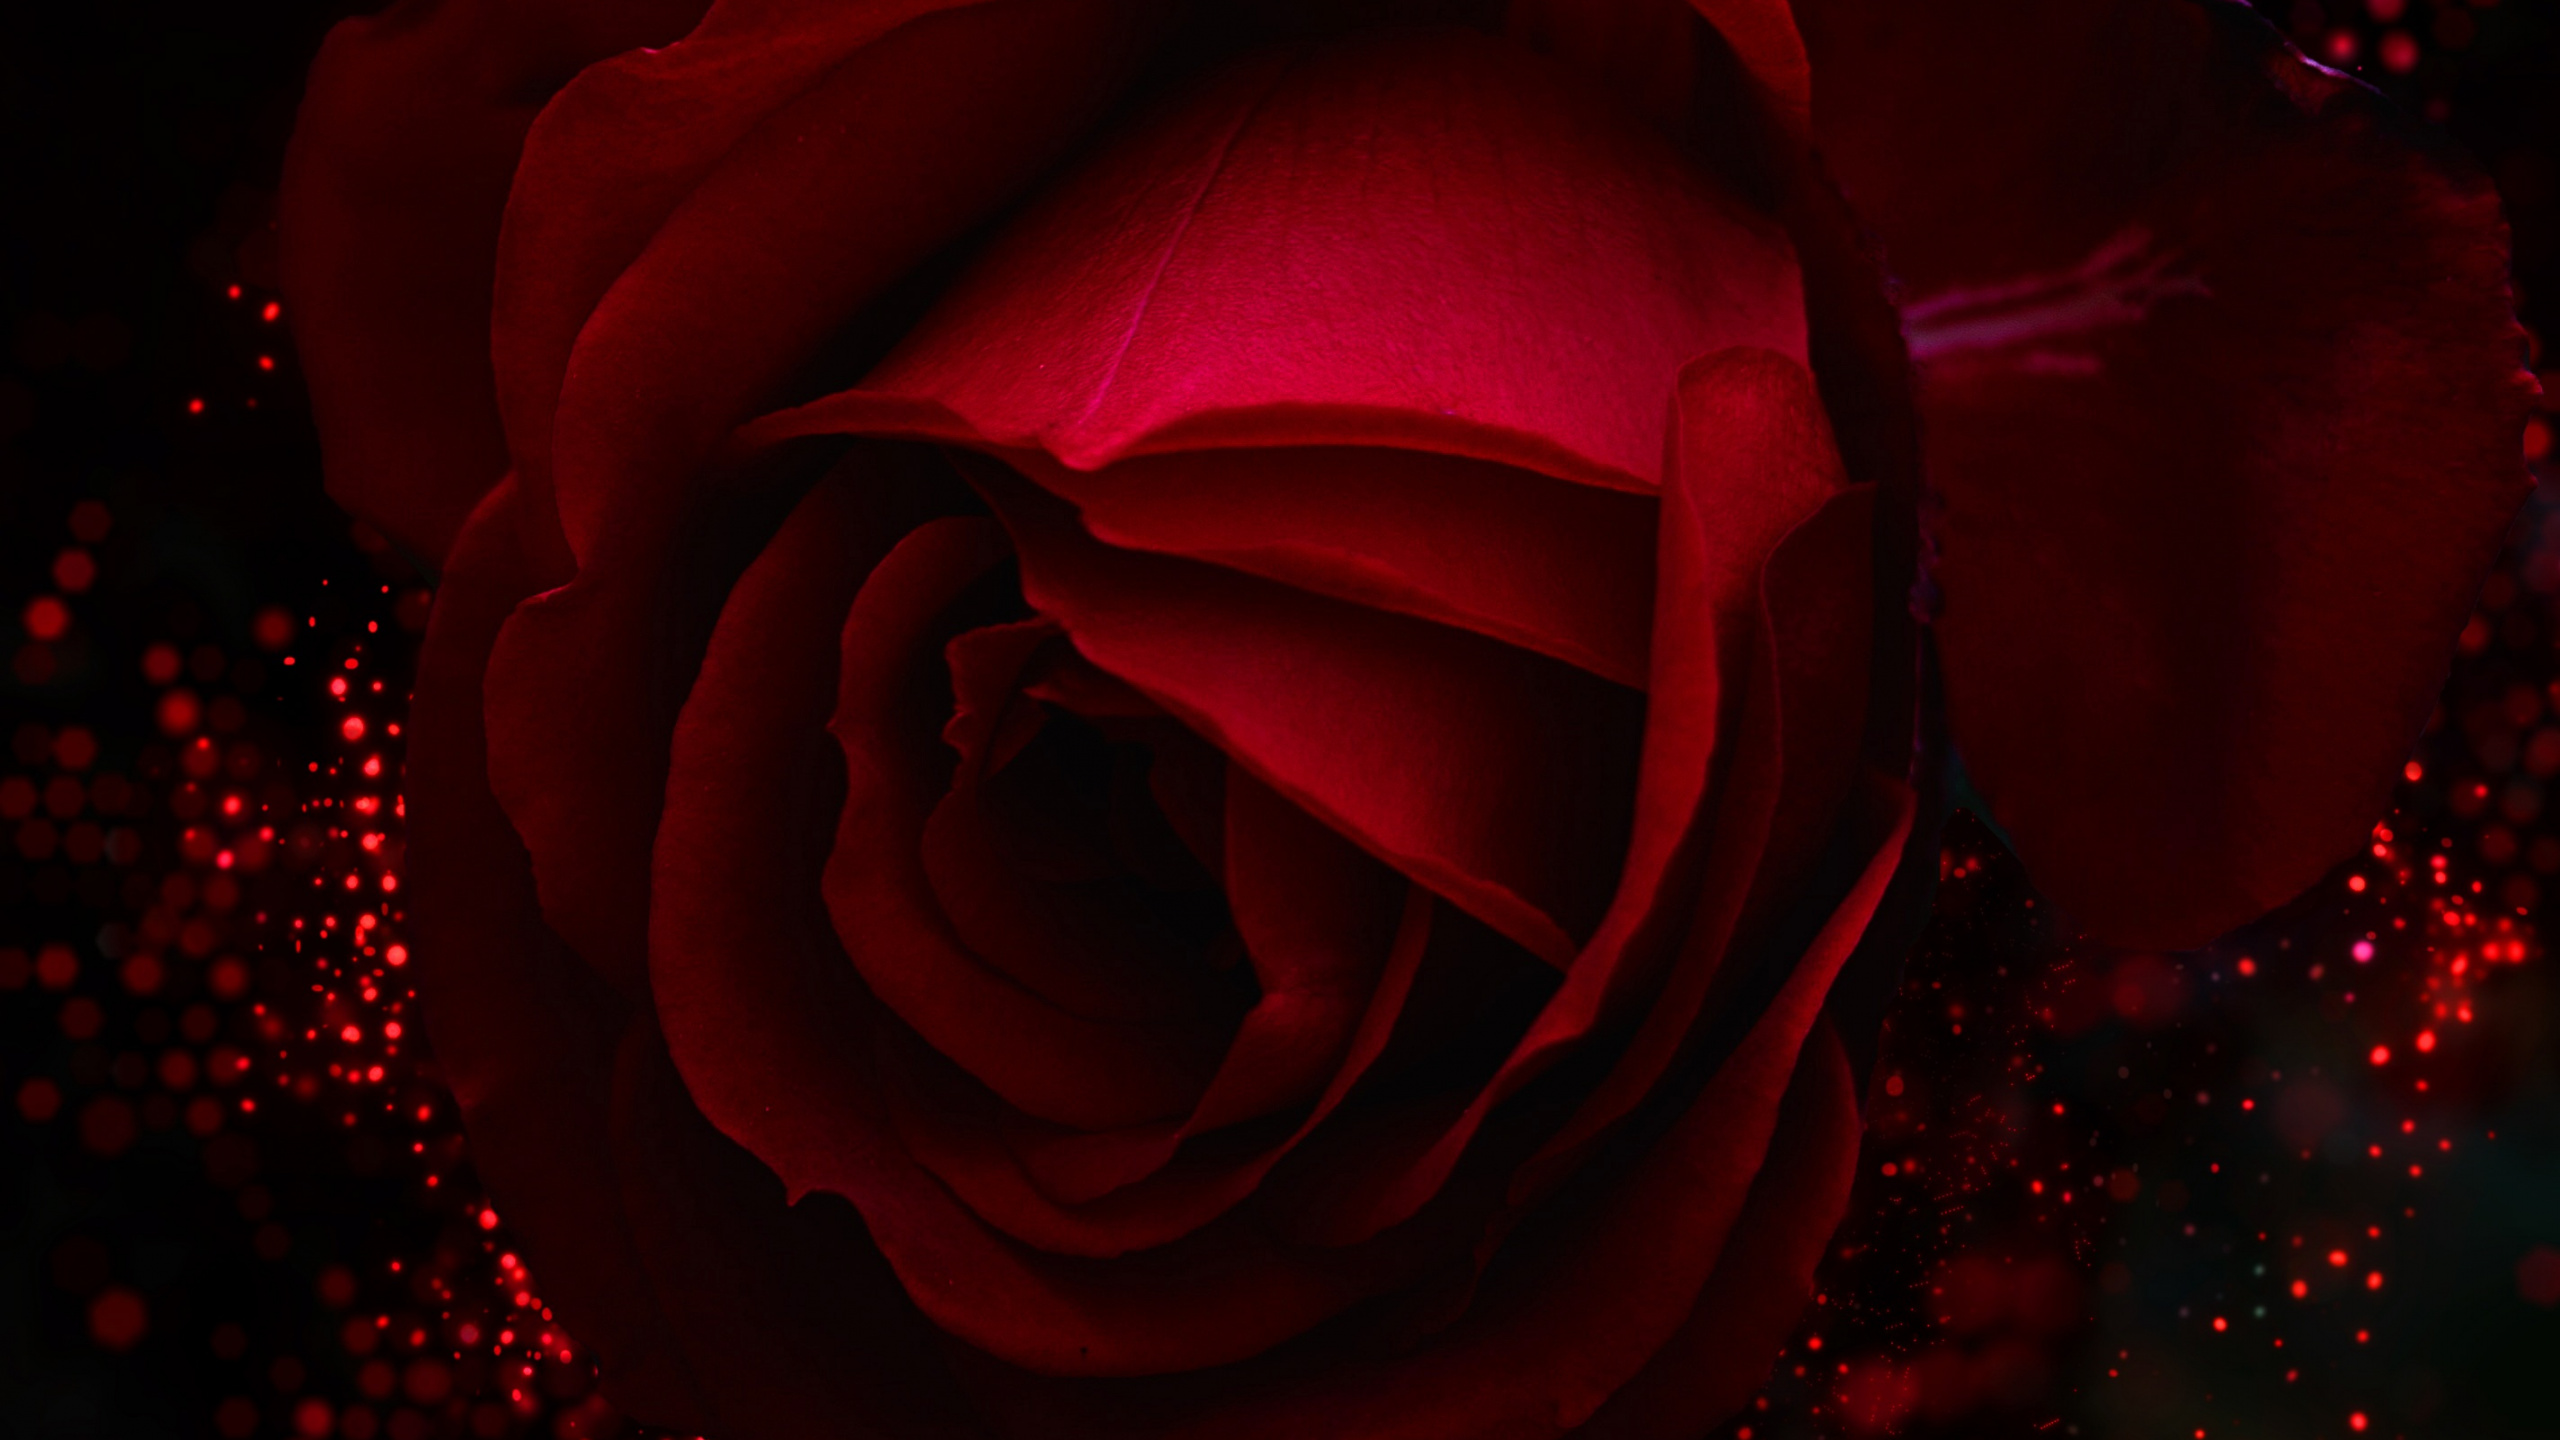 Red Rose With Water Droplets. Wallpaper in 2560x1440 Resolution